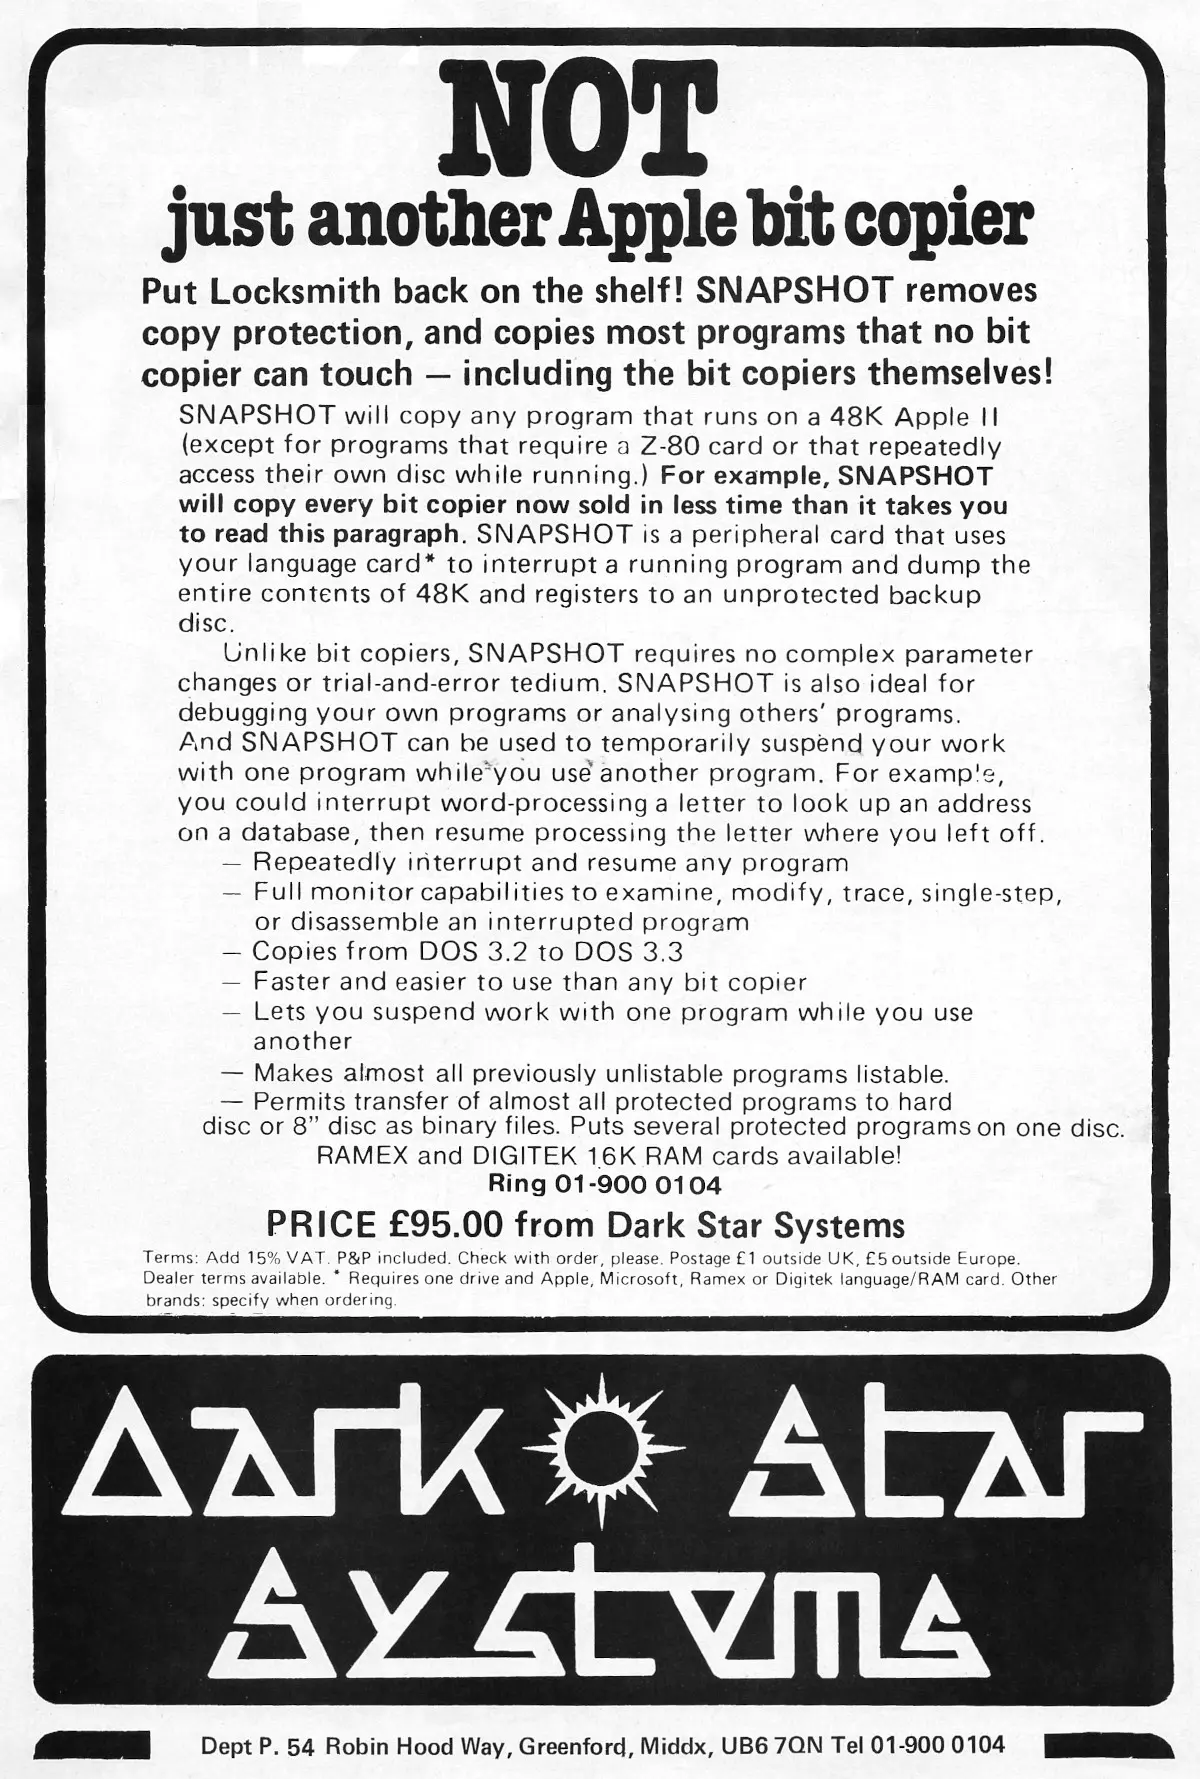 An advert for Dark Star's bit copier - possibly the pinnacle of copiers as it was able to operate at the hardware layer. The 6502 processor in the Apple II that this was aimed add did not implement things like protected memory, so anything that could read memory at the hardware layer had access to everything. From Personal Computer World, December 1982